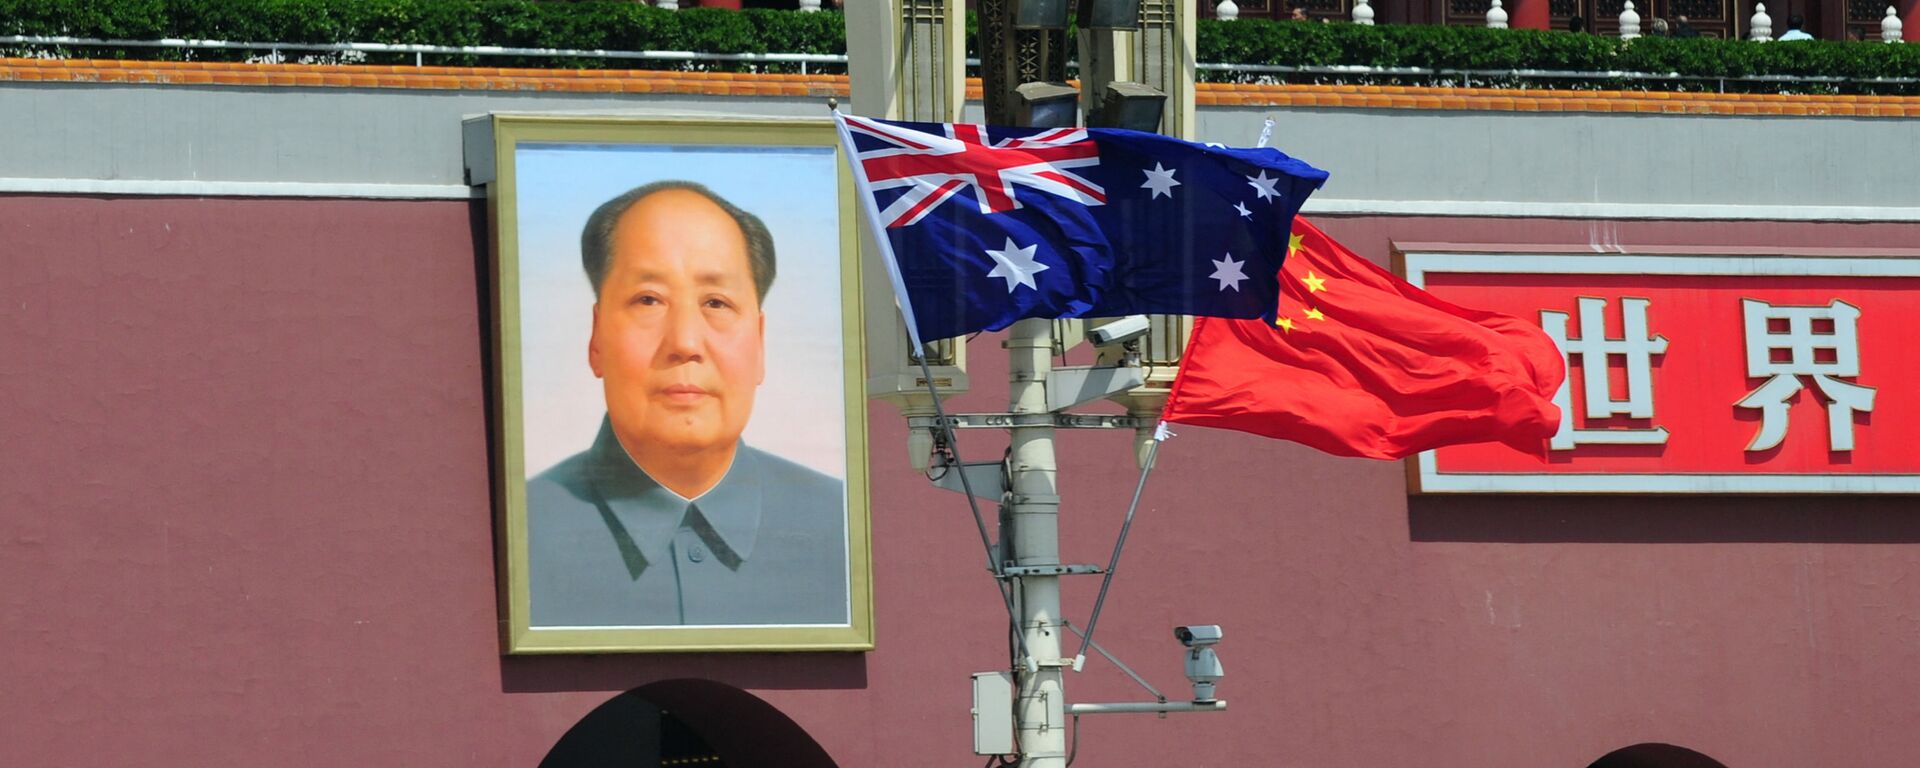 The national flags of Australia and China are displayed before a portrait of Mao Zedong facing Tiananmen Square, during a visit by Australia's Prime Minister Julia Gillard in Beijing on April 26, 2011.  AFP PHOTO/Frederic J. BROWN (Photo by FREDERIC J. BROWN / AFP) - Sputnik International, 1920, 26.11.2021